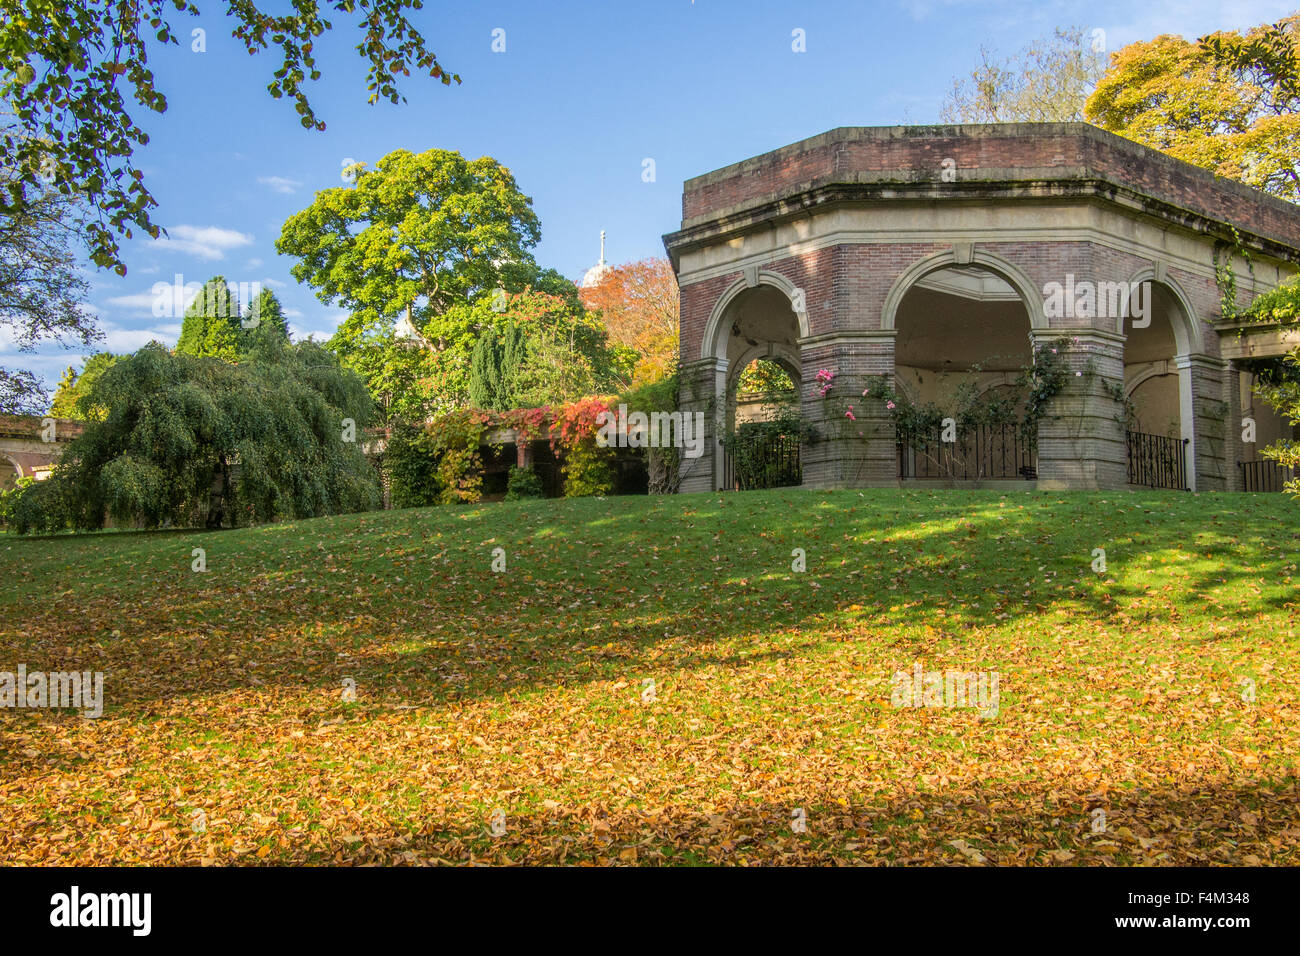 Valley Gardens, Harrogate, une ville thermale, North Yorkshire, Angleterre. Banque D'Images